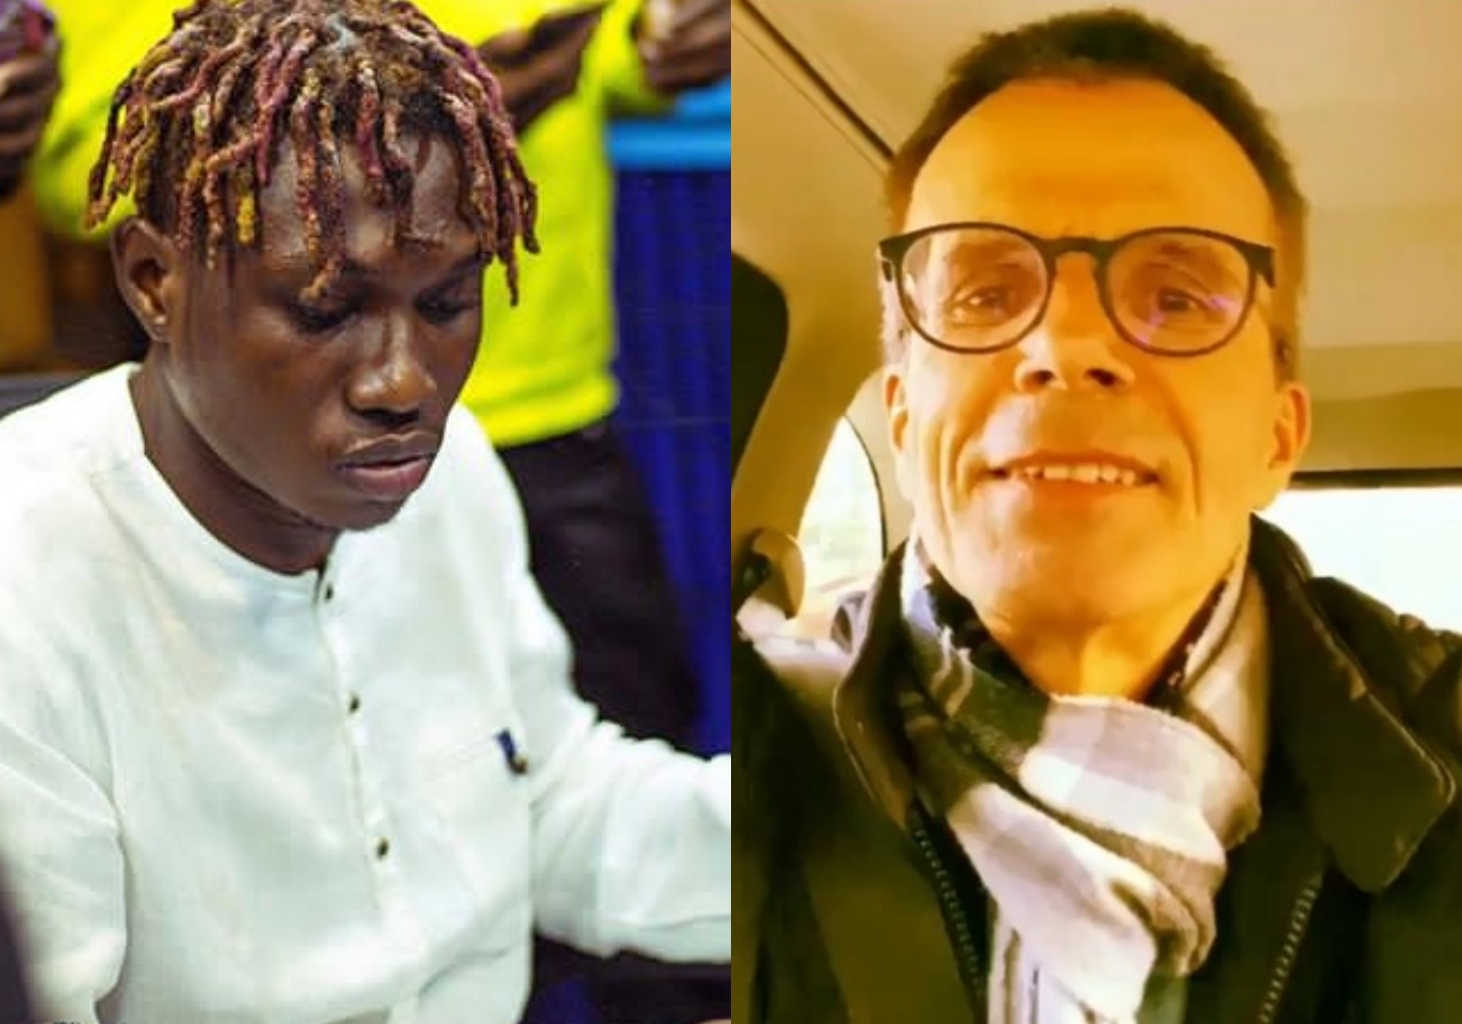 Zlatan Ibile excited as oyinbo man sing his hit single 'Unripe Paw Paw' (Video)